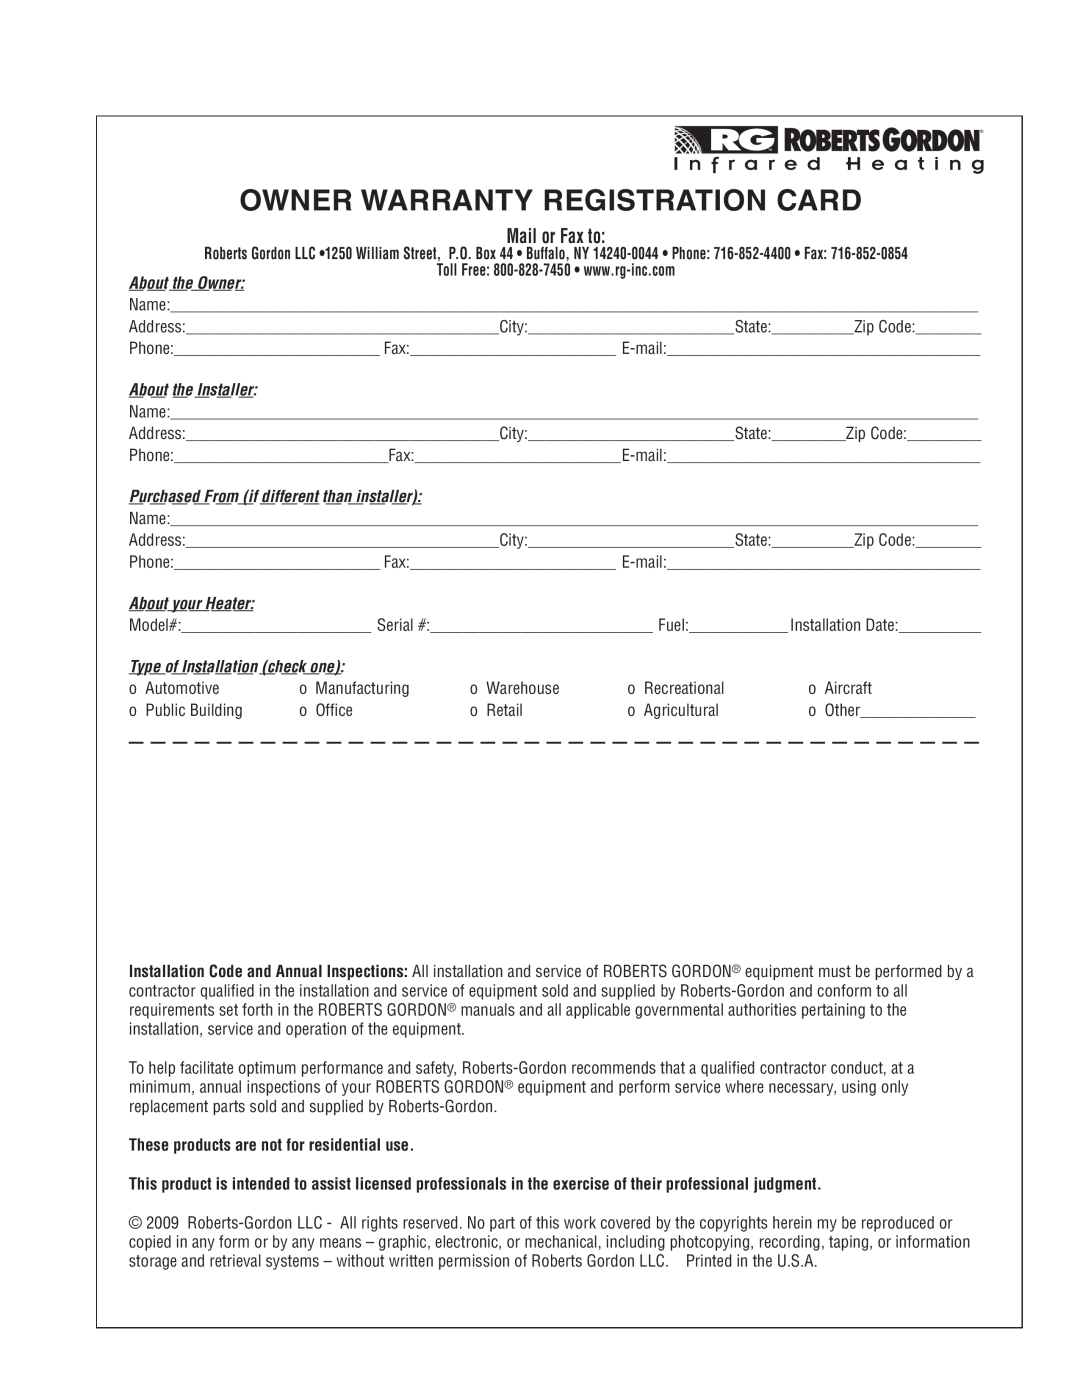 Roberts Gorden Linear Heater manual Owner Warranty Registration Card, Mail or Fax to, About the Owner, About the Installer 